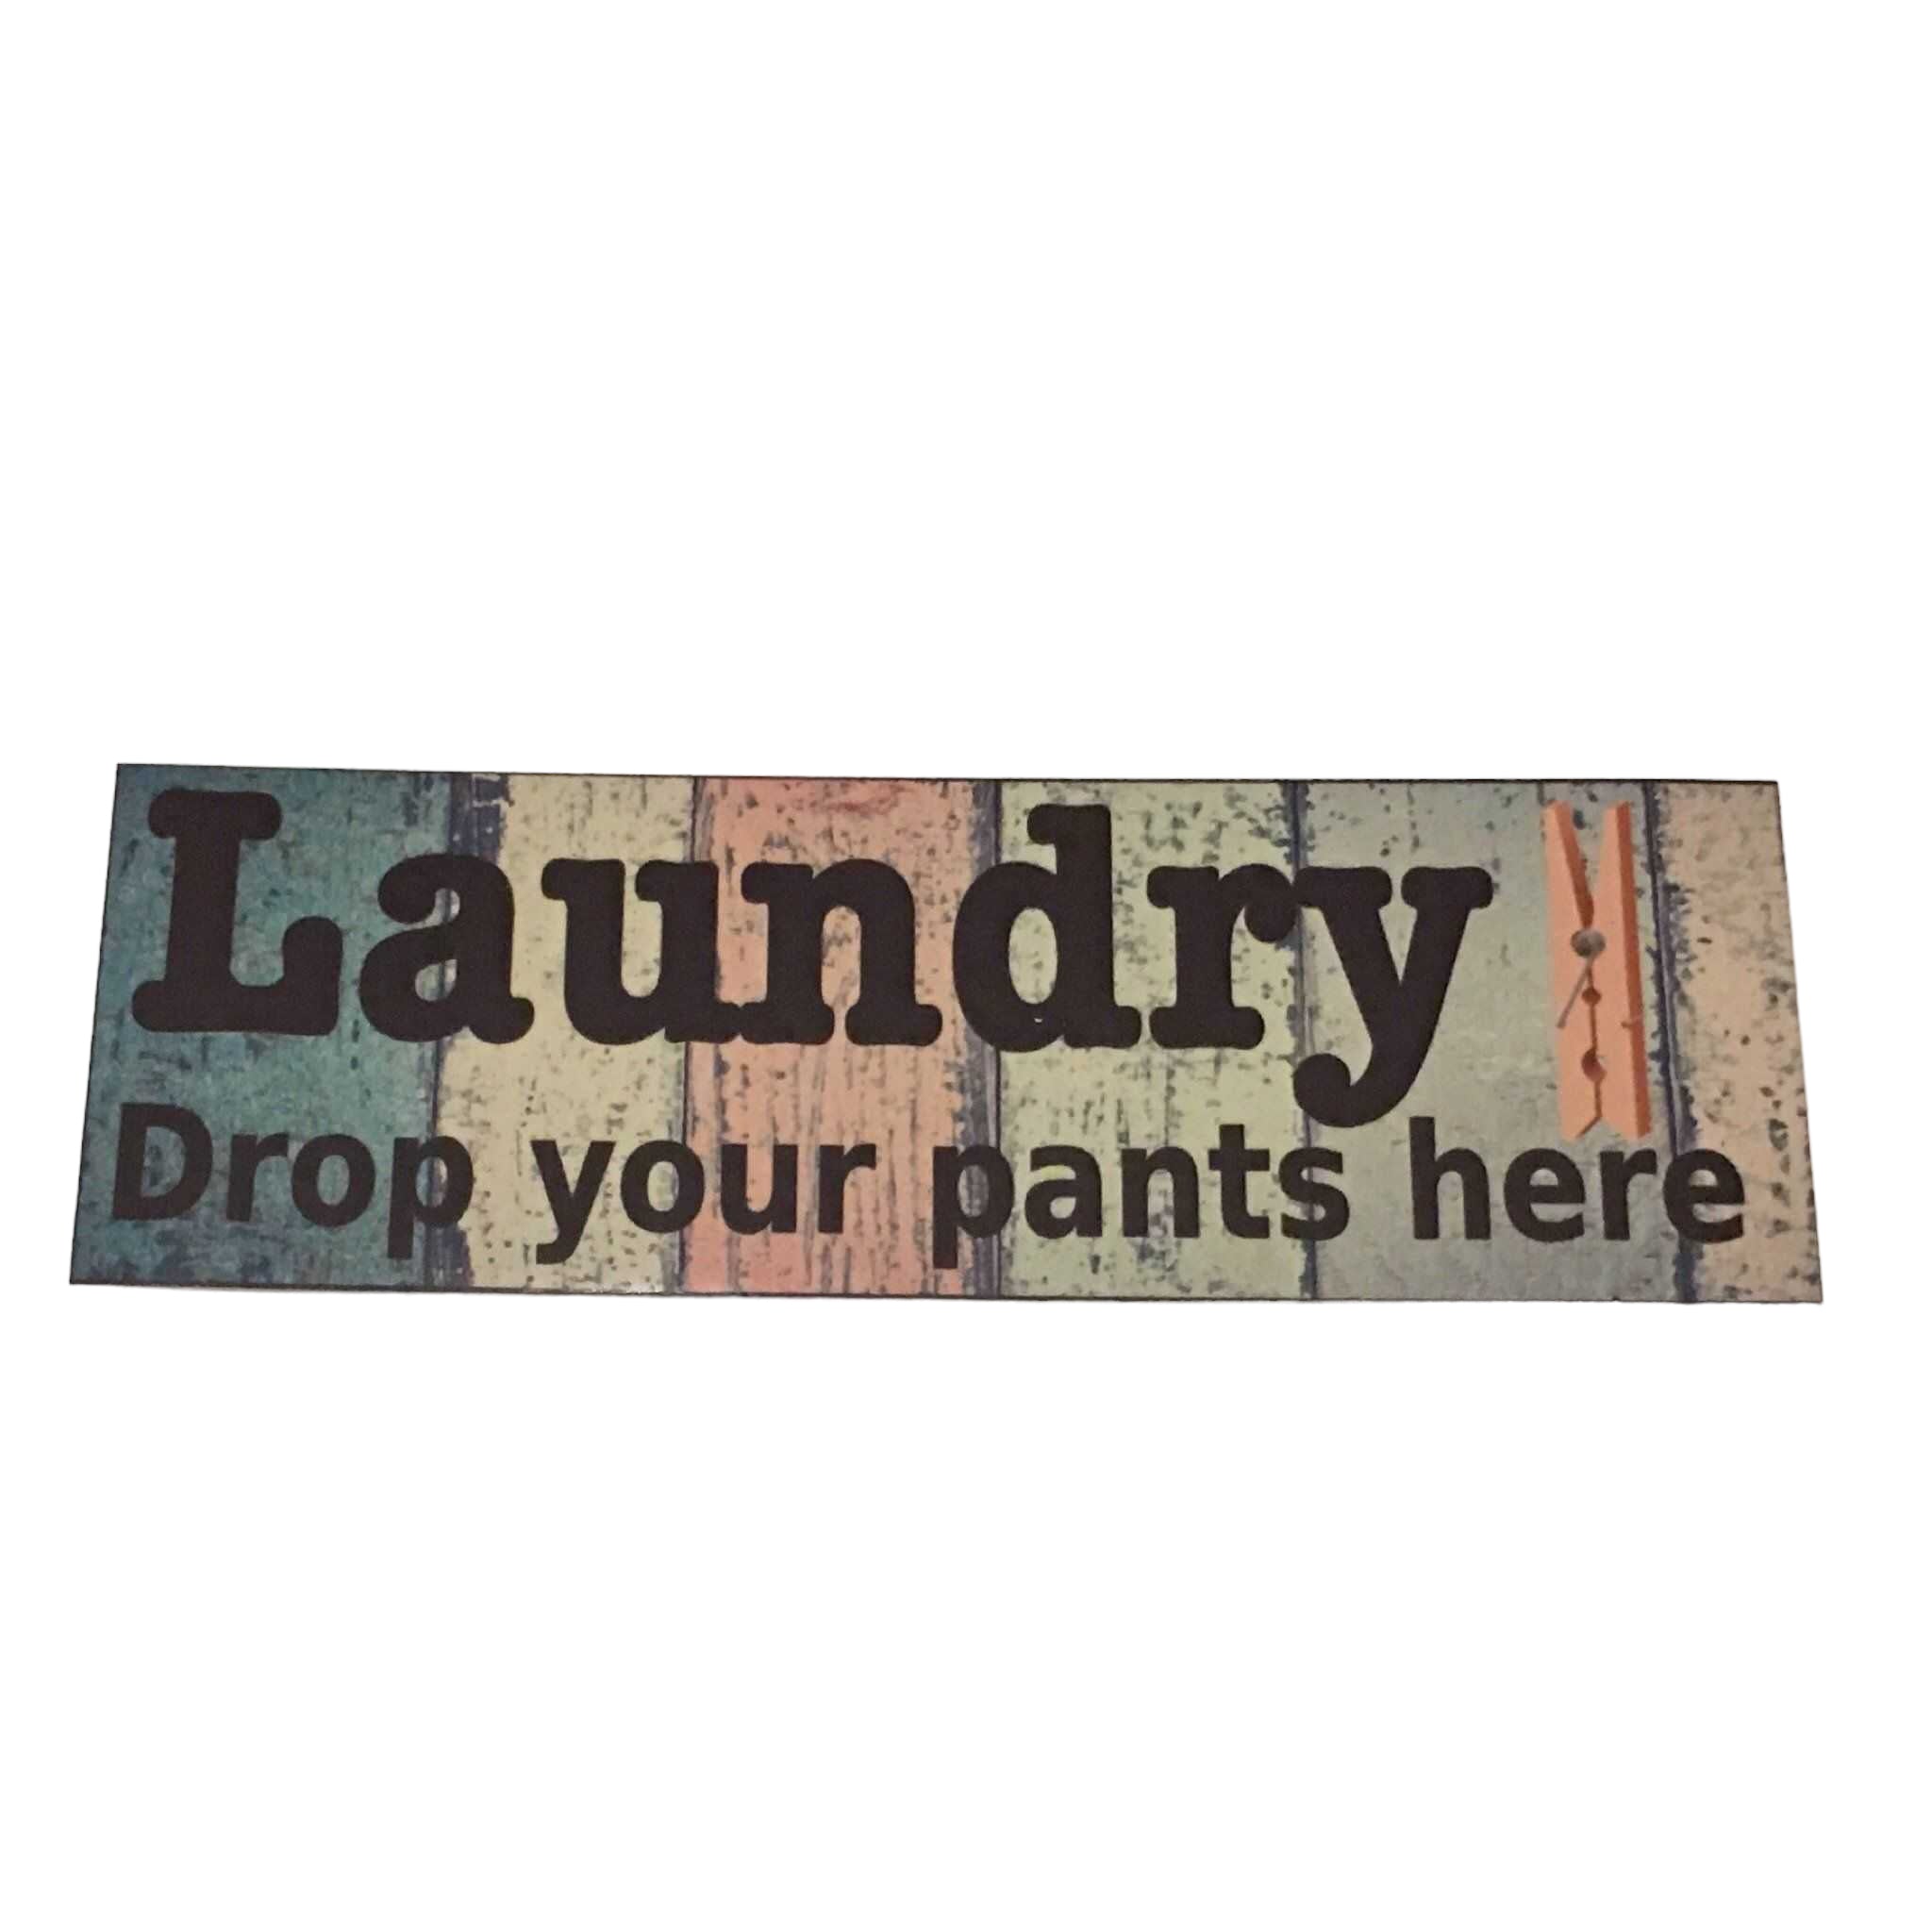 Laundry Drop Pants Retro Metal Sign 24 x 36 Inches